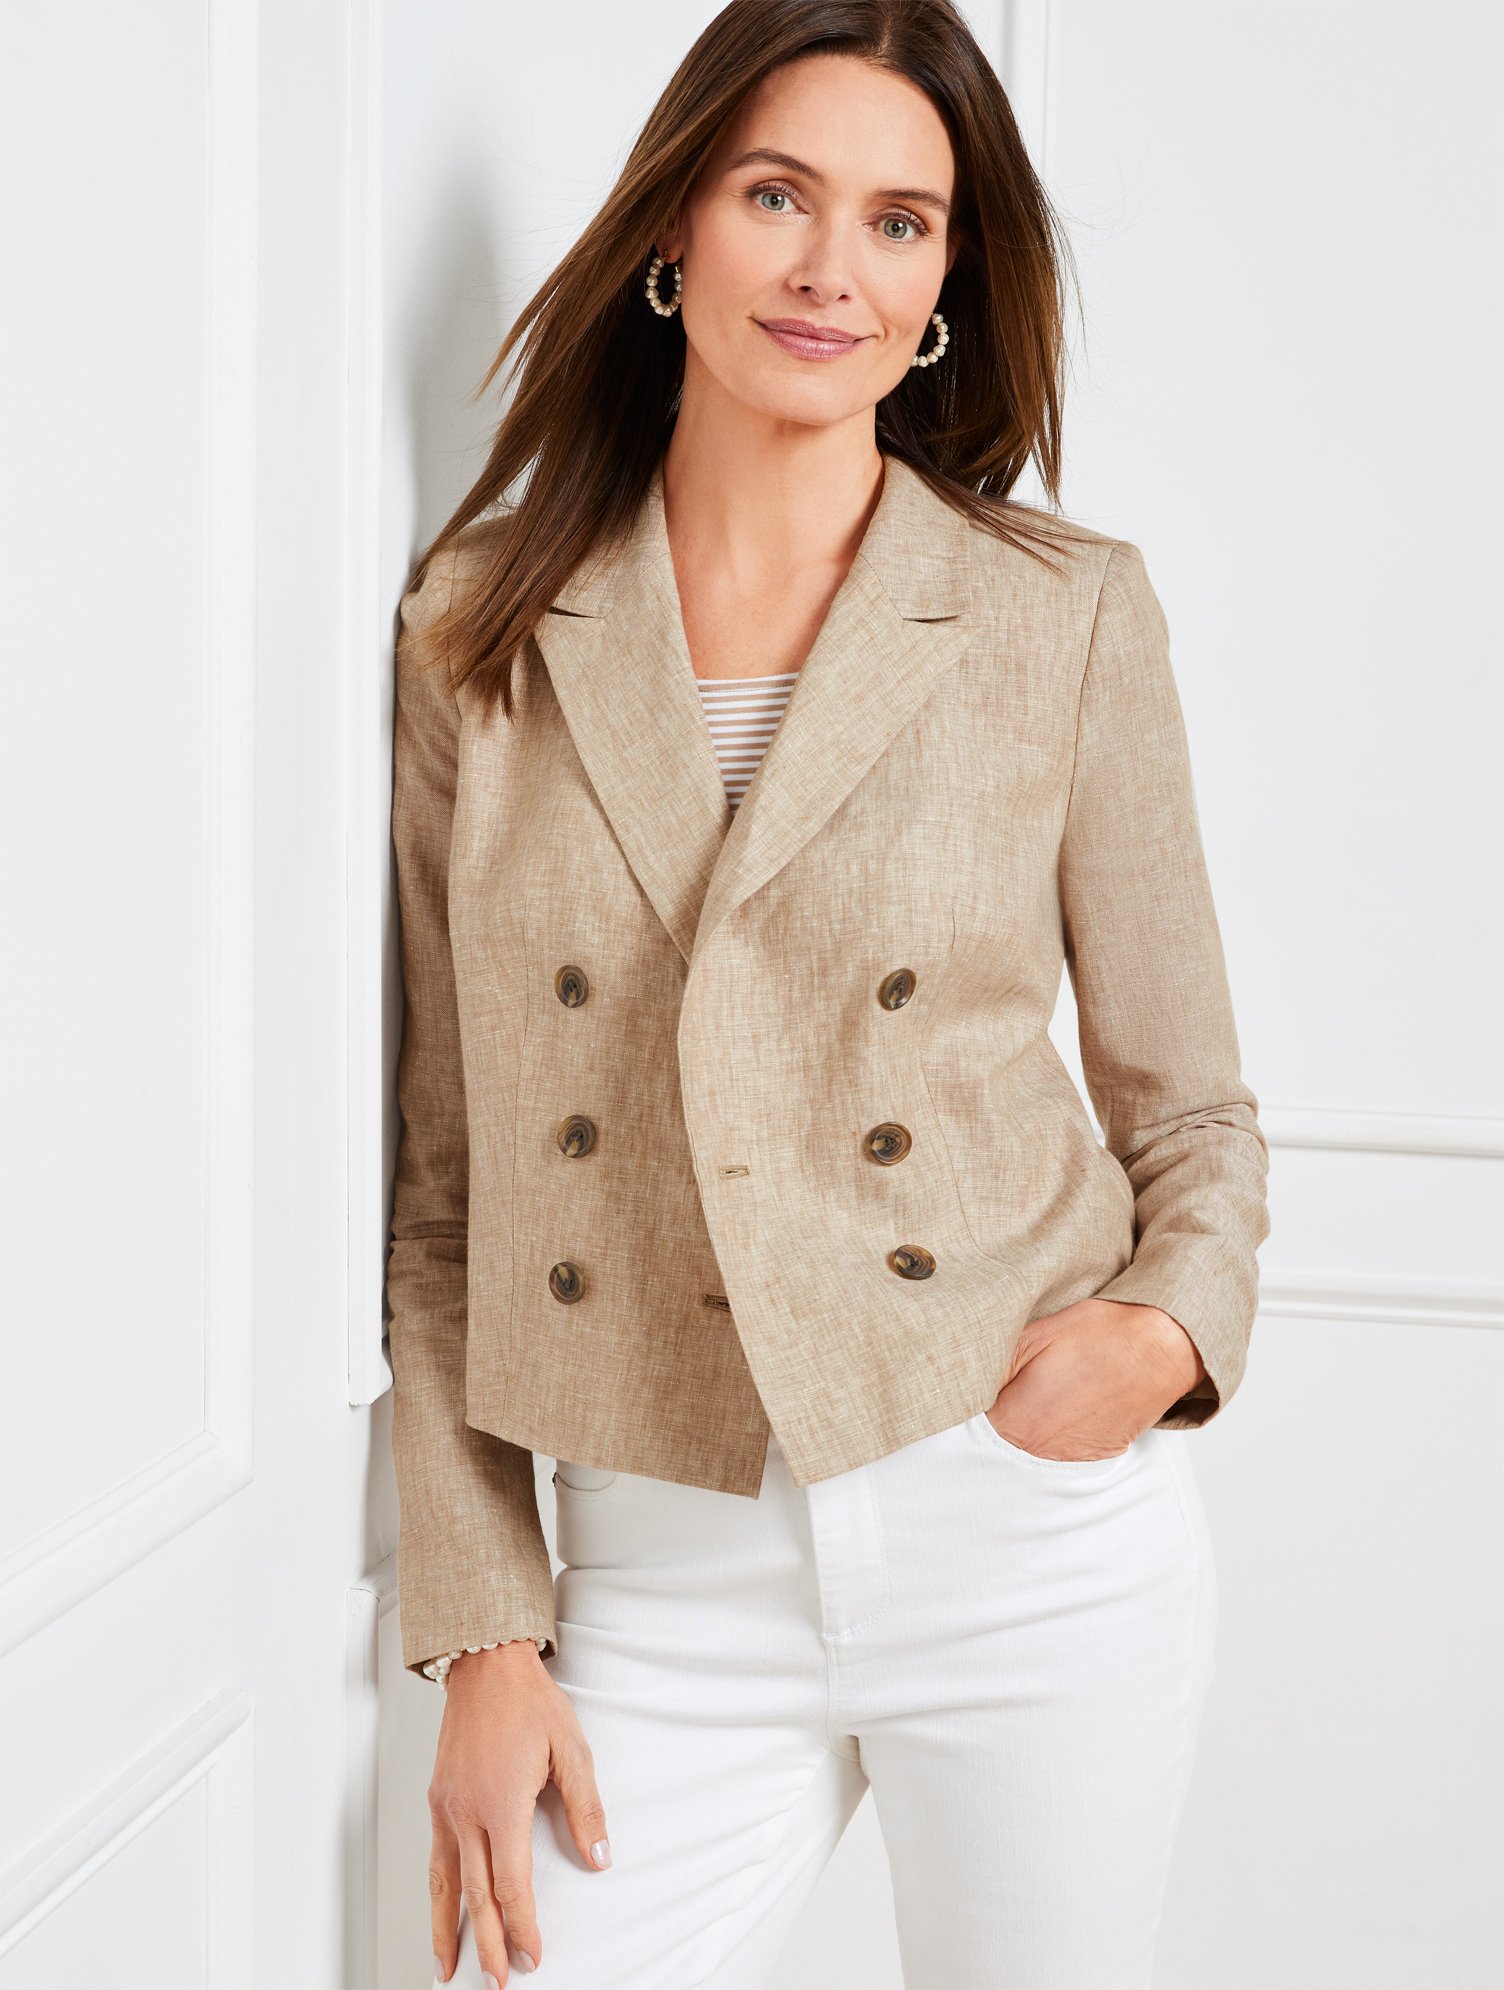 Talbots Cropped Linen Jacket - Taupe/white - 22  In Taupe,white